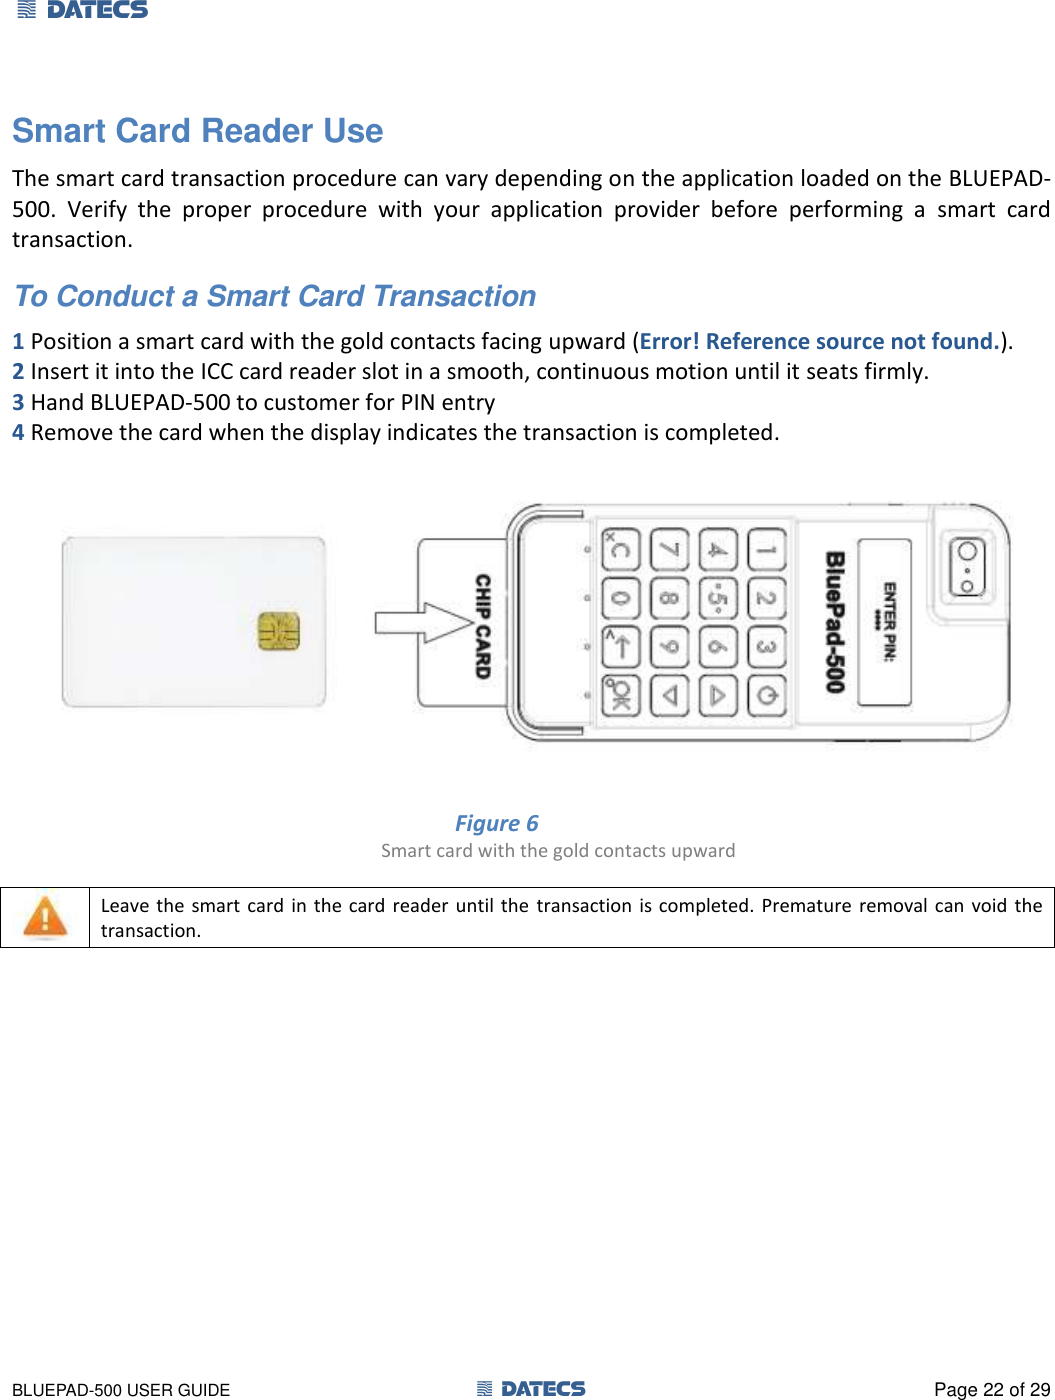 1 DATECS       BLUEPAD-500 USER GUIDE  1 DATECS  Page 22 of 29 Smart Card Reader Use  The smart card transaction procedure can vary depending on the application loaded on the BLUEPAD-500.  Verify  the  proper  procedure  with  your  application  provider  before  performing  a  smart  card transaction. To Conduct a Smart Card Transaction  1 Position a smart card with the gold contacts facing upward (Error! Reference source not found.). 2 Insert it into the ICC card reader slot in a smooth, continuous motion until it seats firmly.  3 Hand BLUEPAD-500 to customer for PIN entry  4 Remove the card when the display indicates the transaction is completed.   Figure 6           Smart card with the gold contacts upward    Leave the smart  card  in the card reader until  the  transaction  is completed. Premature  removal can void  the transaction.     